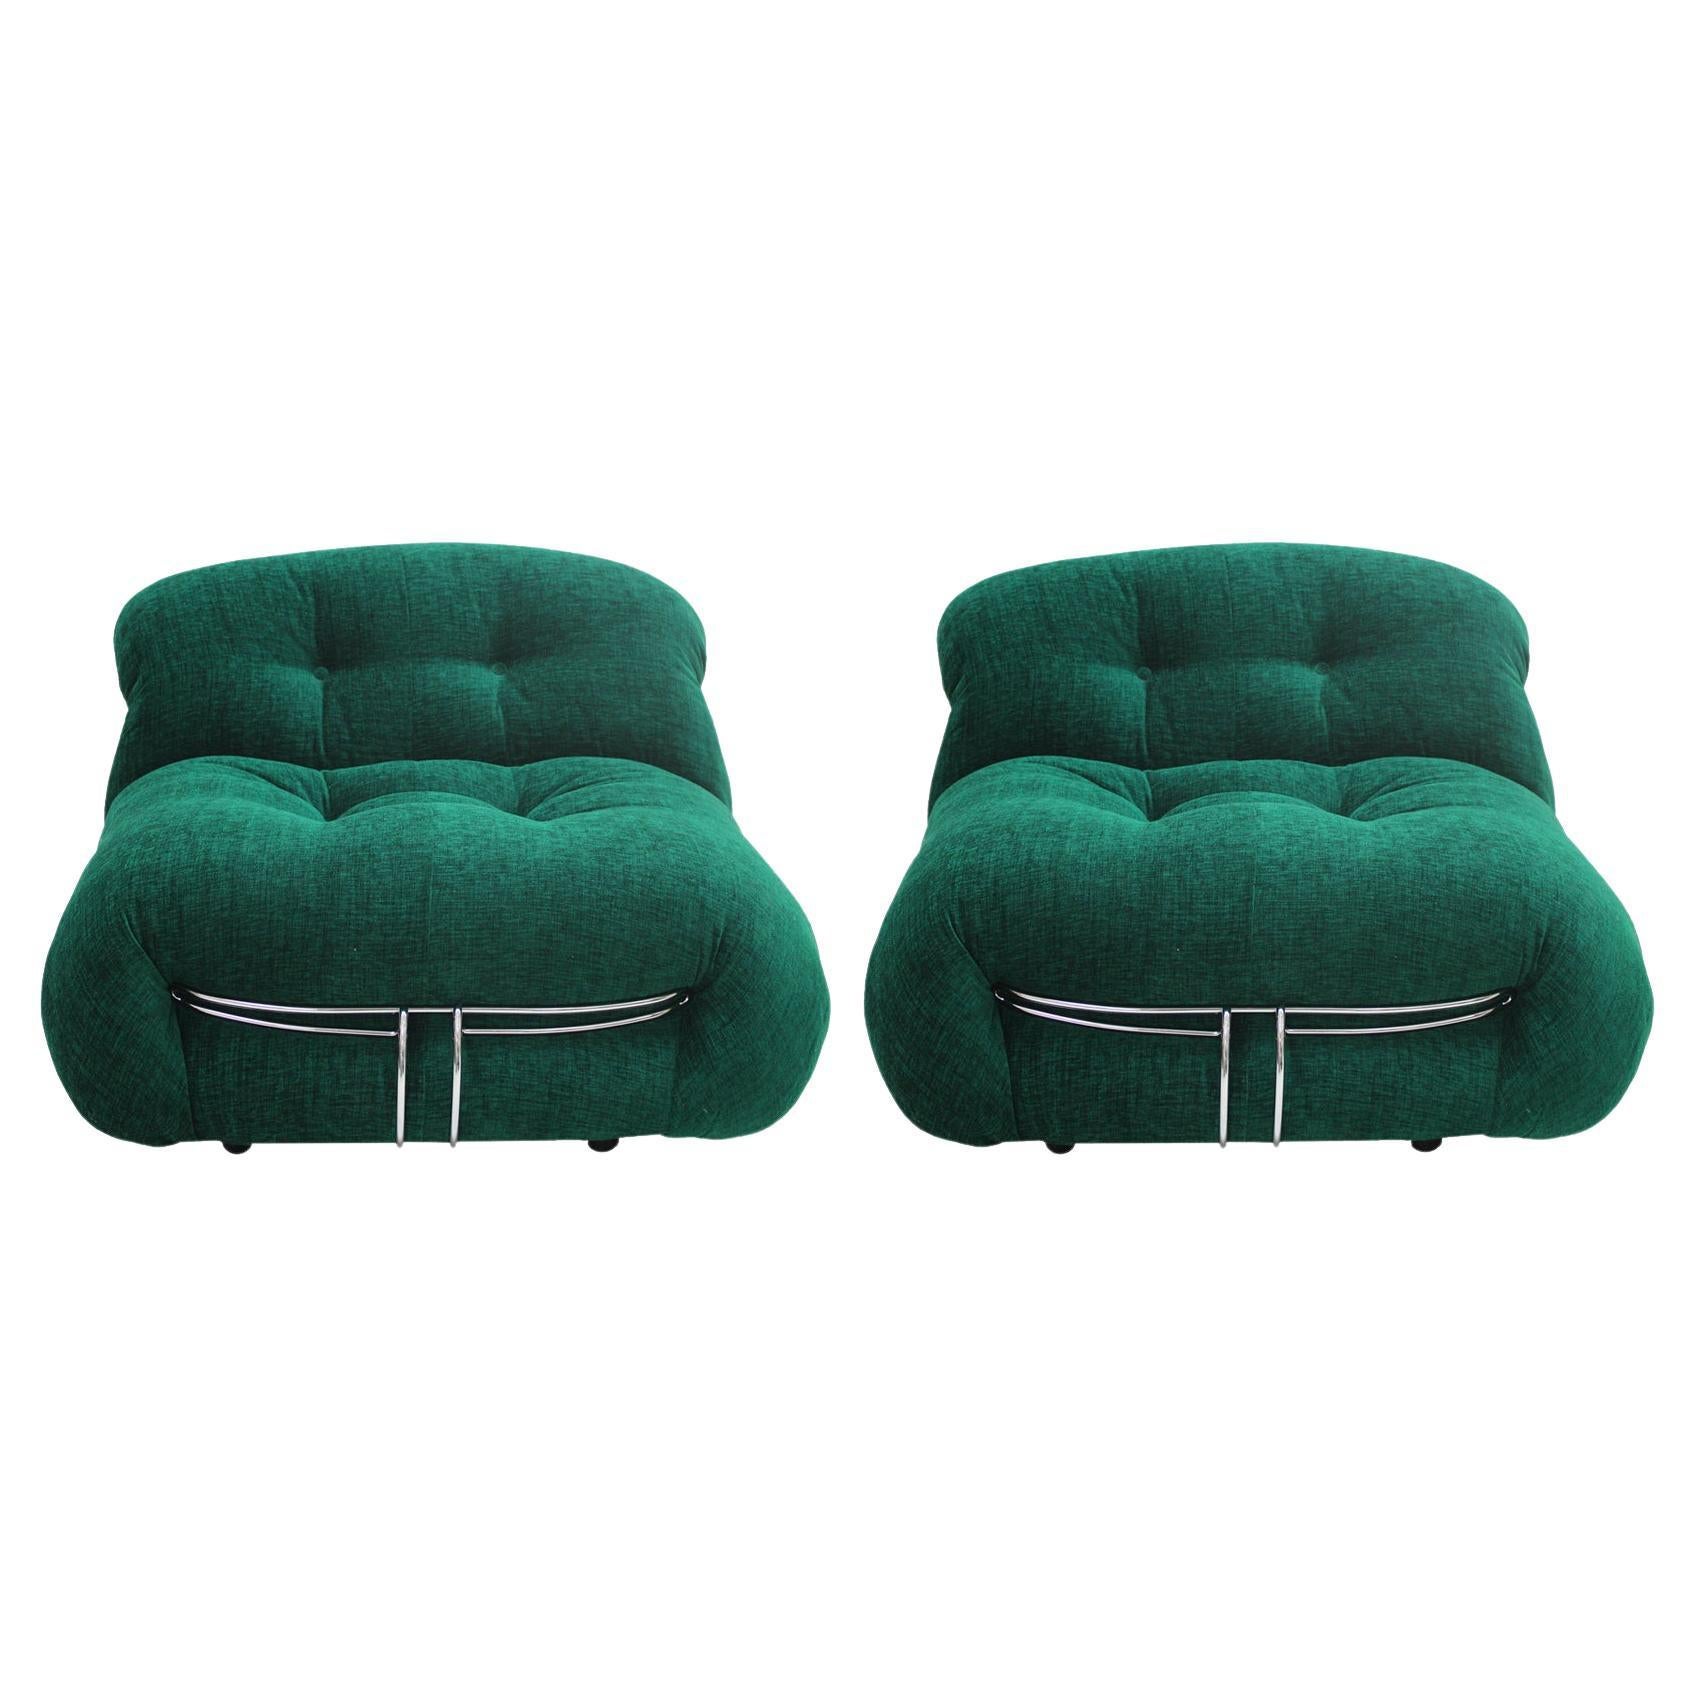 Pair of "Soriana" Armchairs Designed by Tobia Scarpa Edited by Cassina, 1960s For Sale